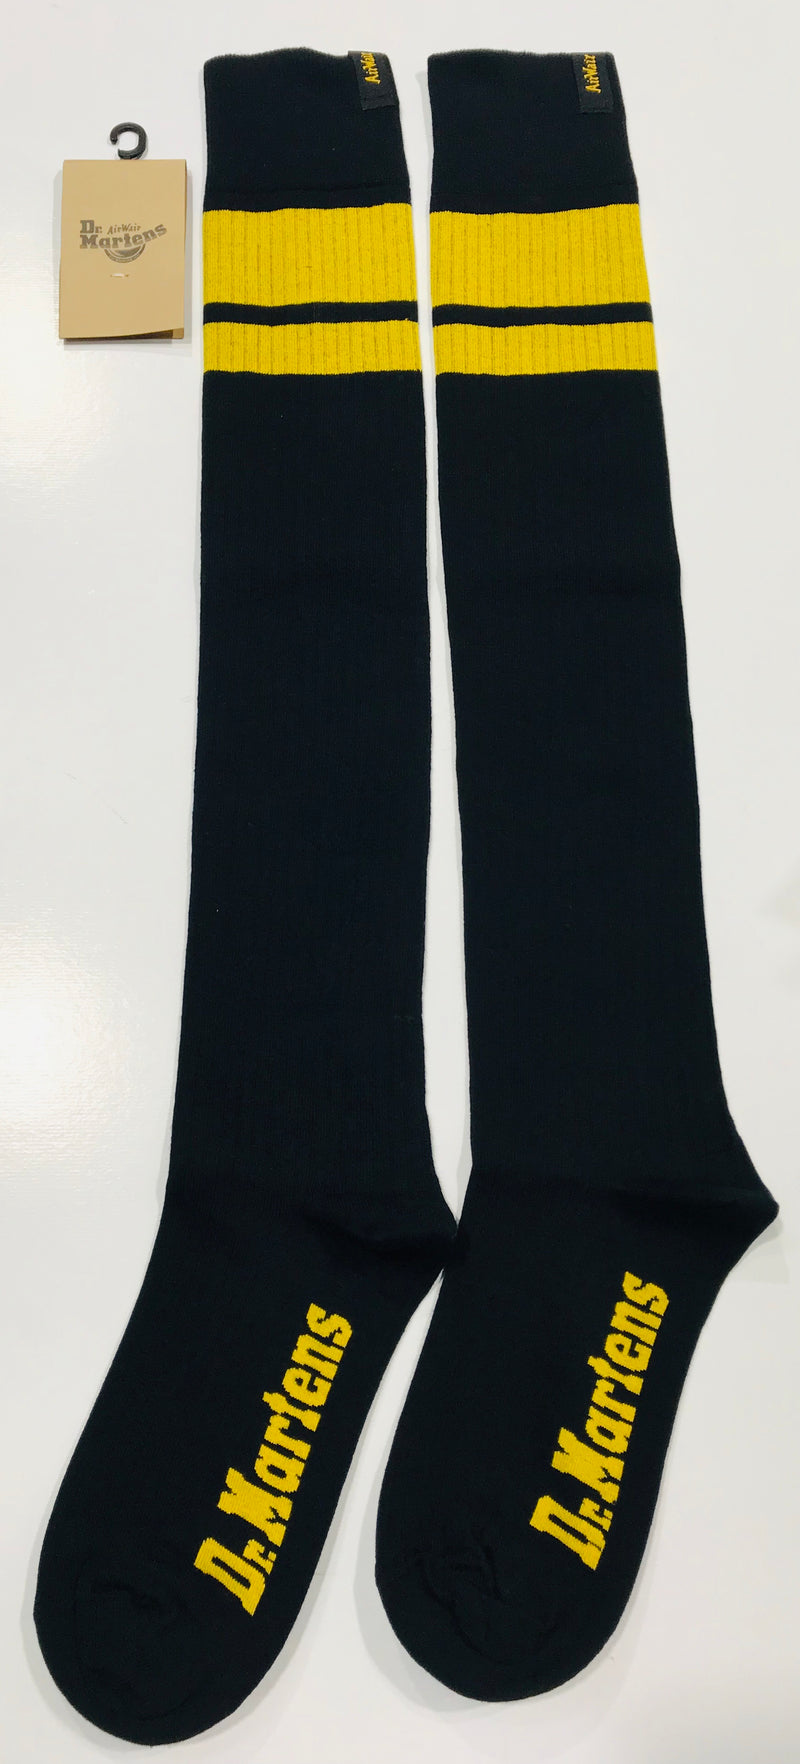 Dr Martens AirWair Women's Tall Sock Black and Yellow